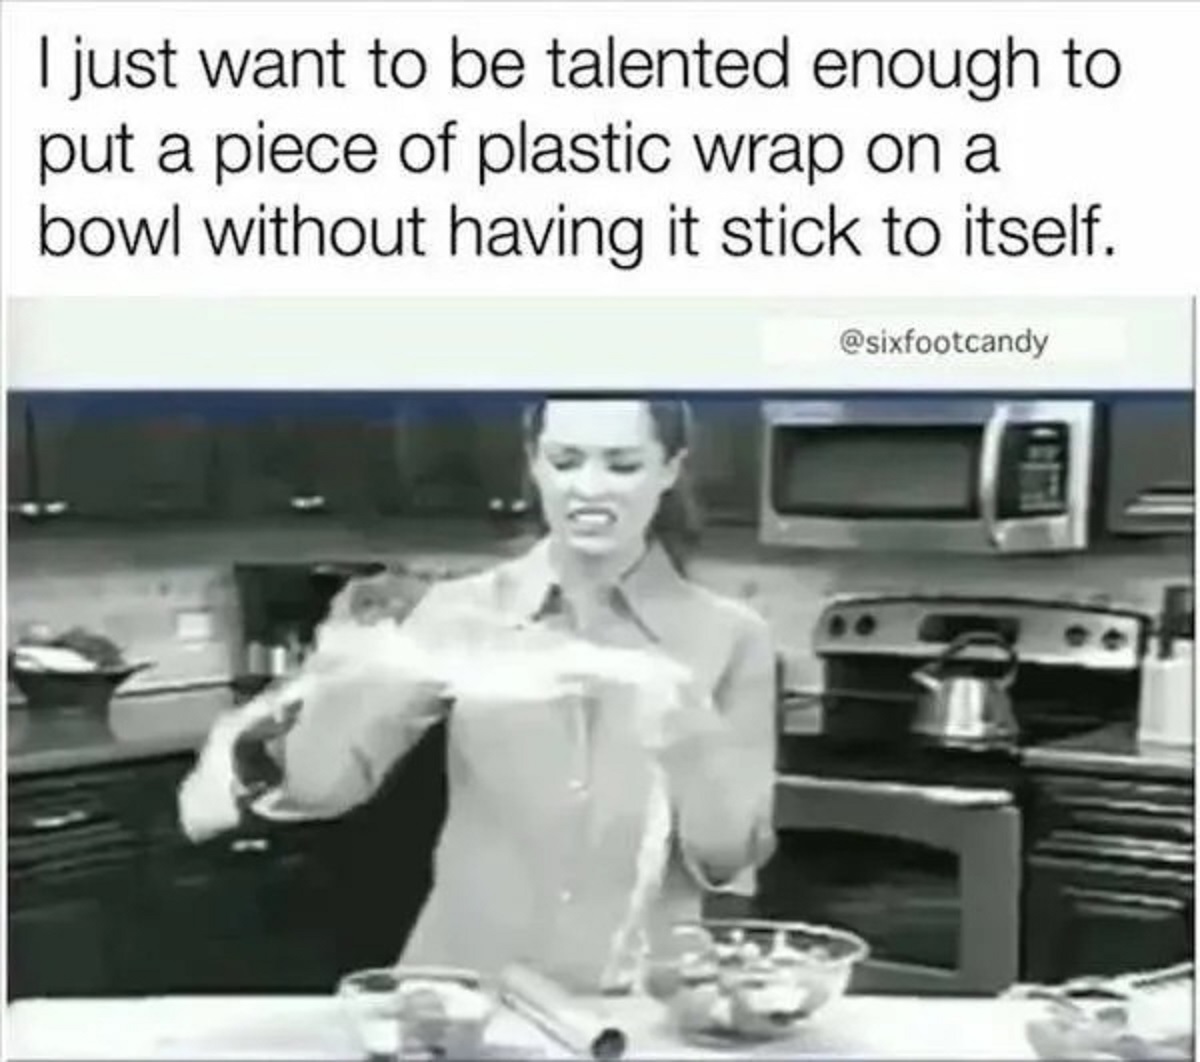 girl - I just want to be talented enough to put a piece of plastic wrap on a bowl without having it stick to itself.